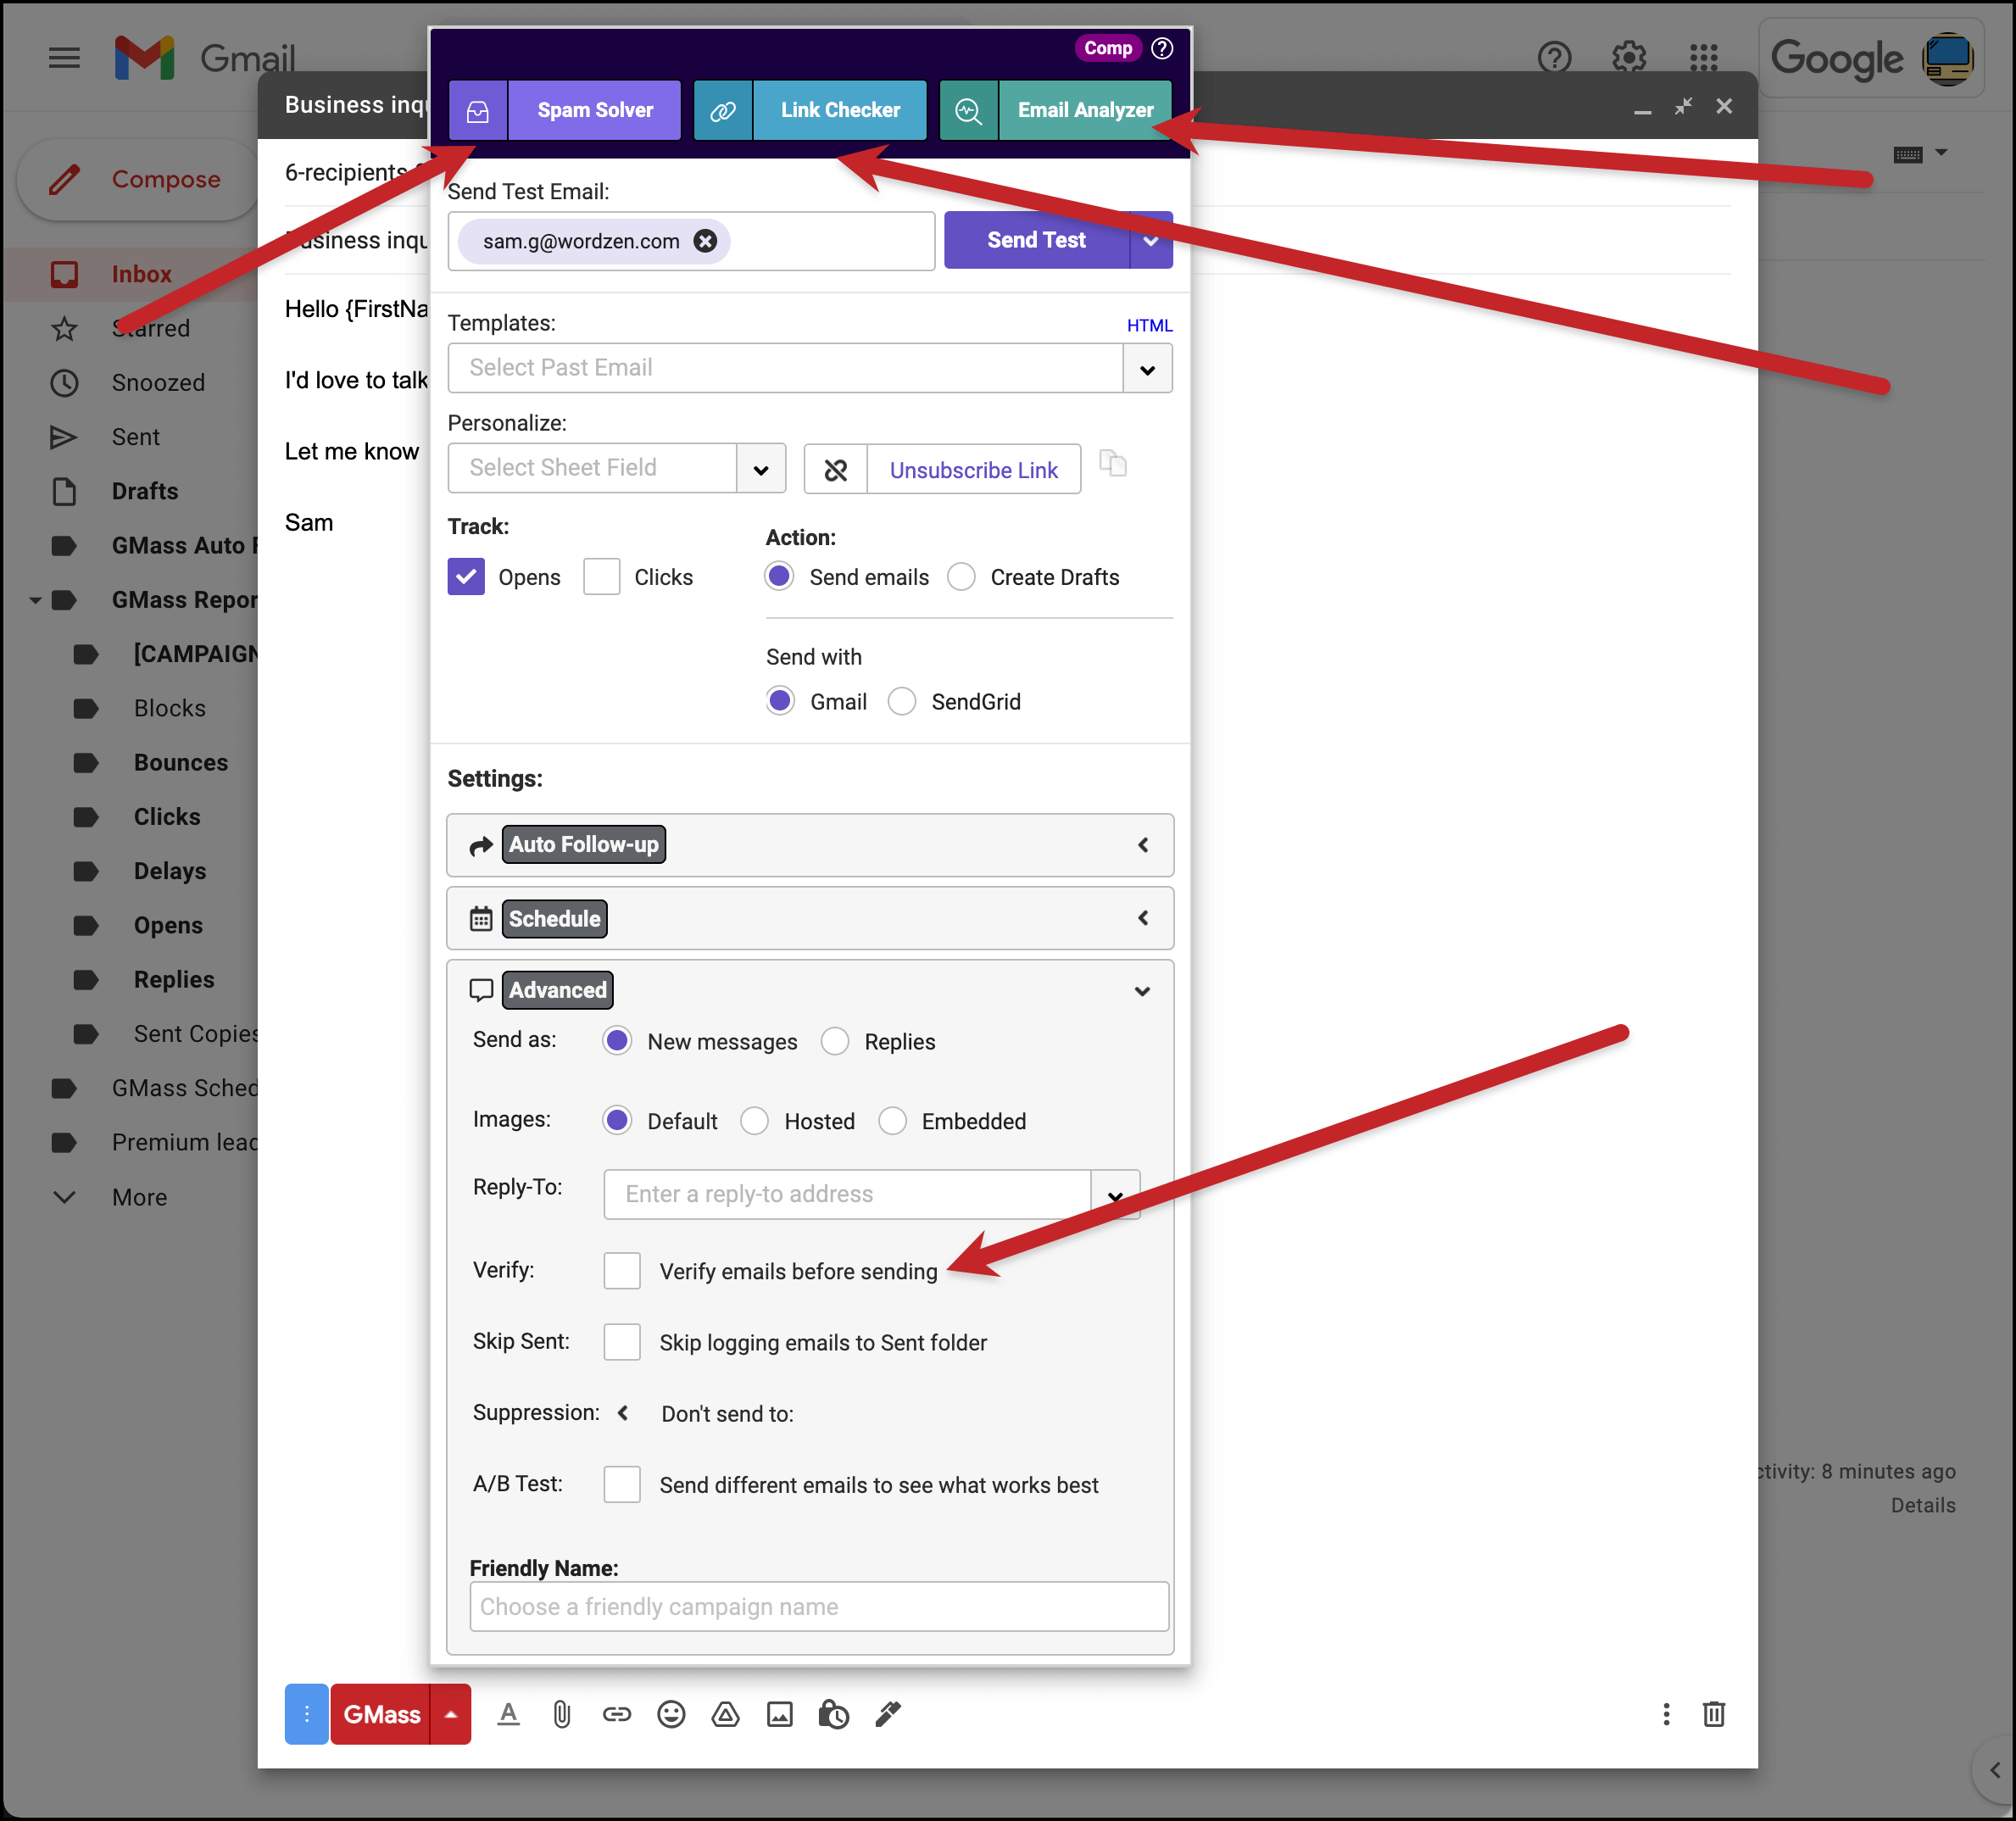 GMass's testing options in the settings box